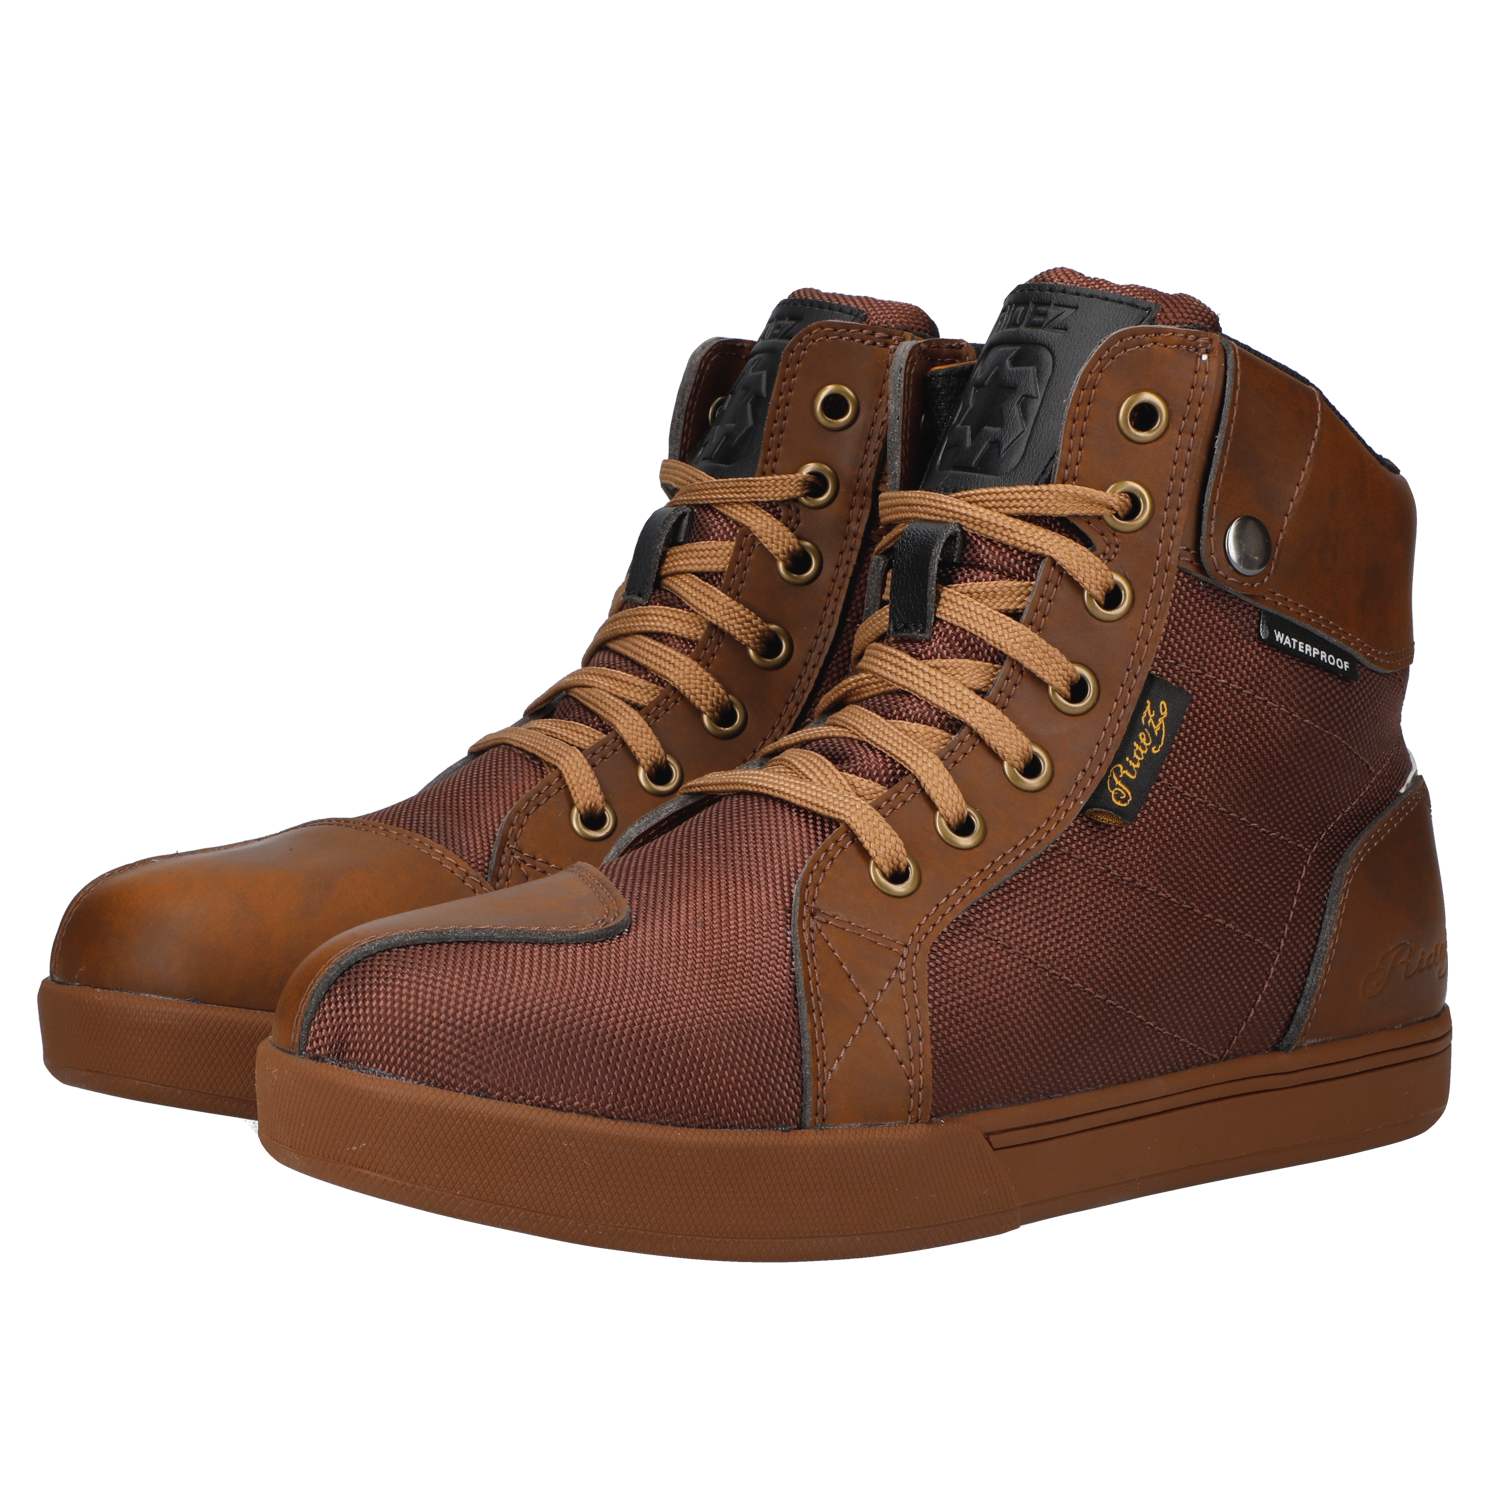 RIDEZ SNEAKERS MOTO-AW BROWN Riding Shoes